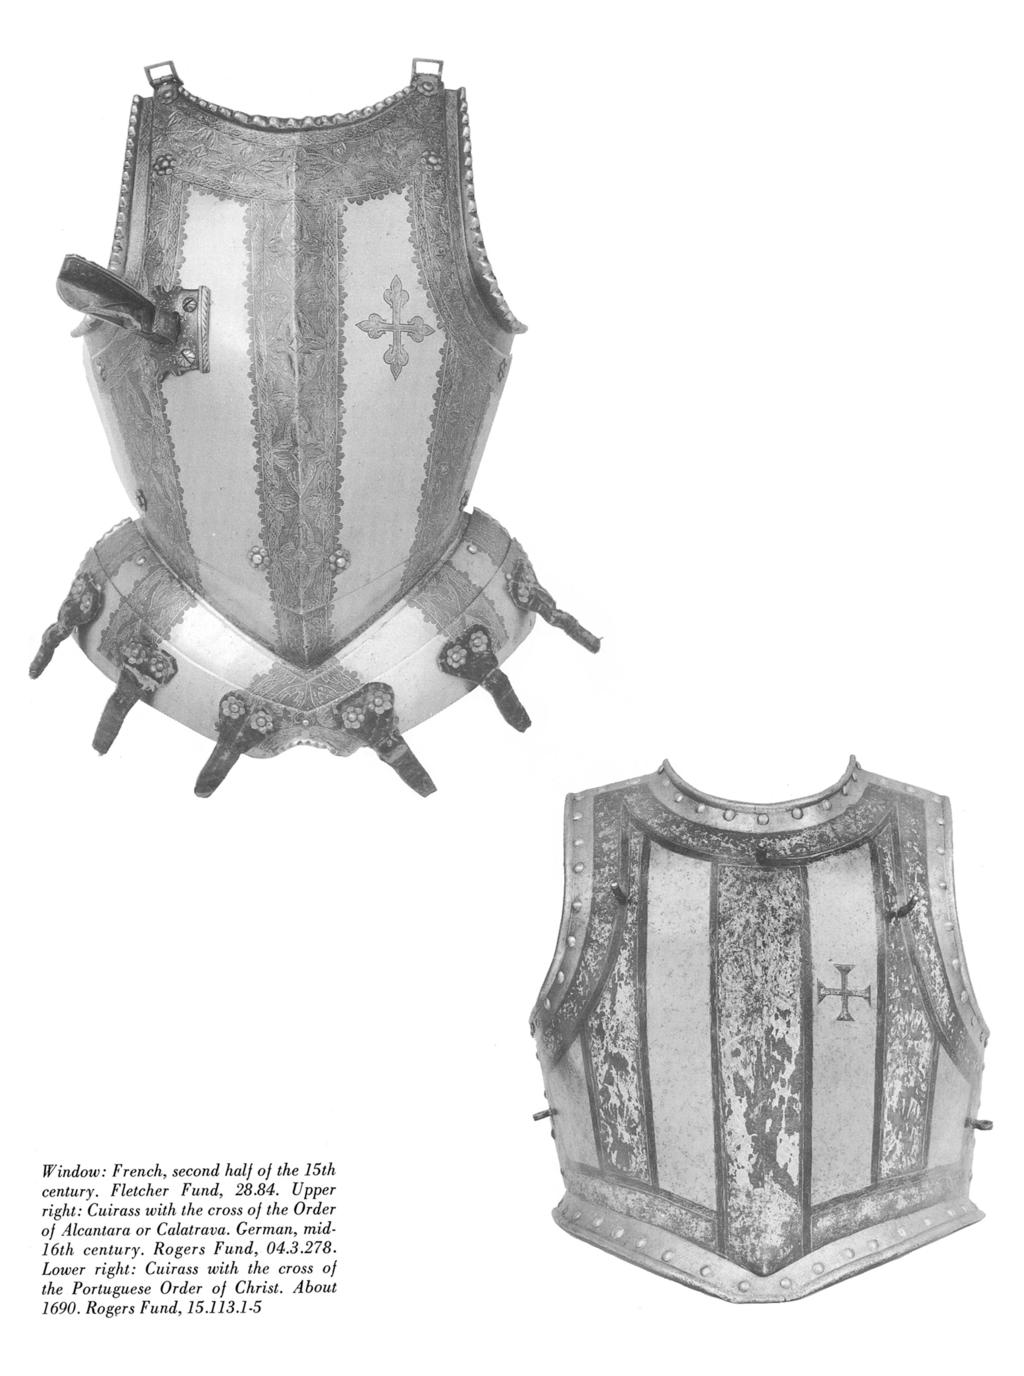 Window: French, second half of the 15th century Fletcher Fund, 2884 Upper right: Cuirass with the cross of the Order of Alcantara or Calatrava